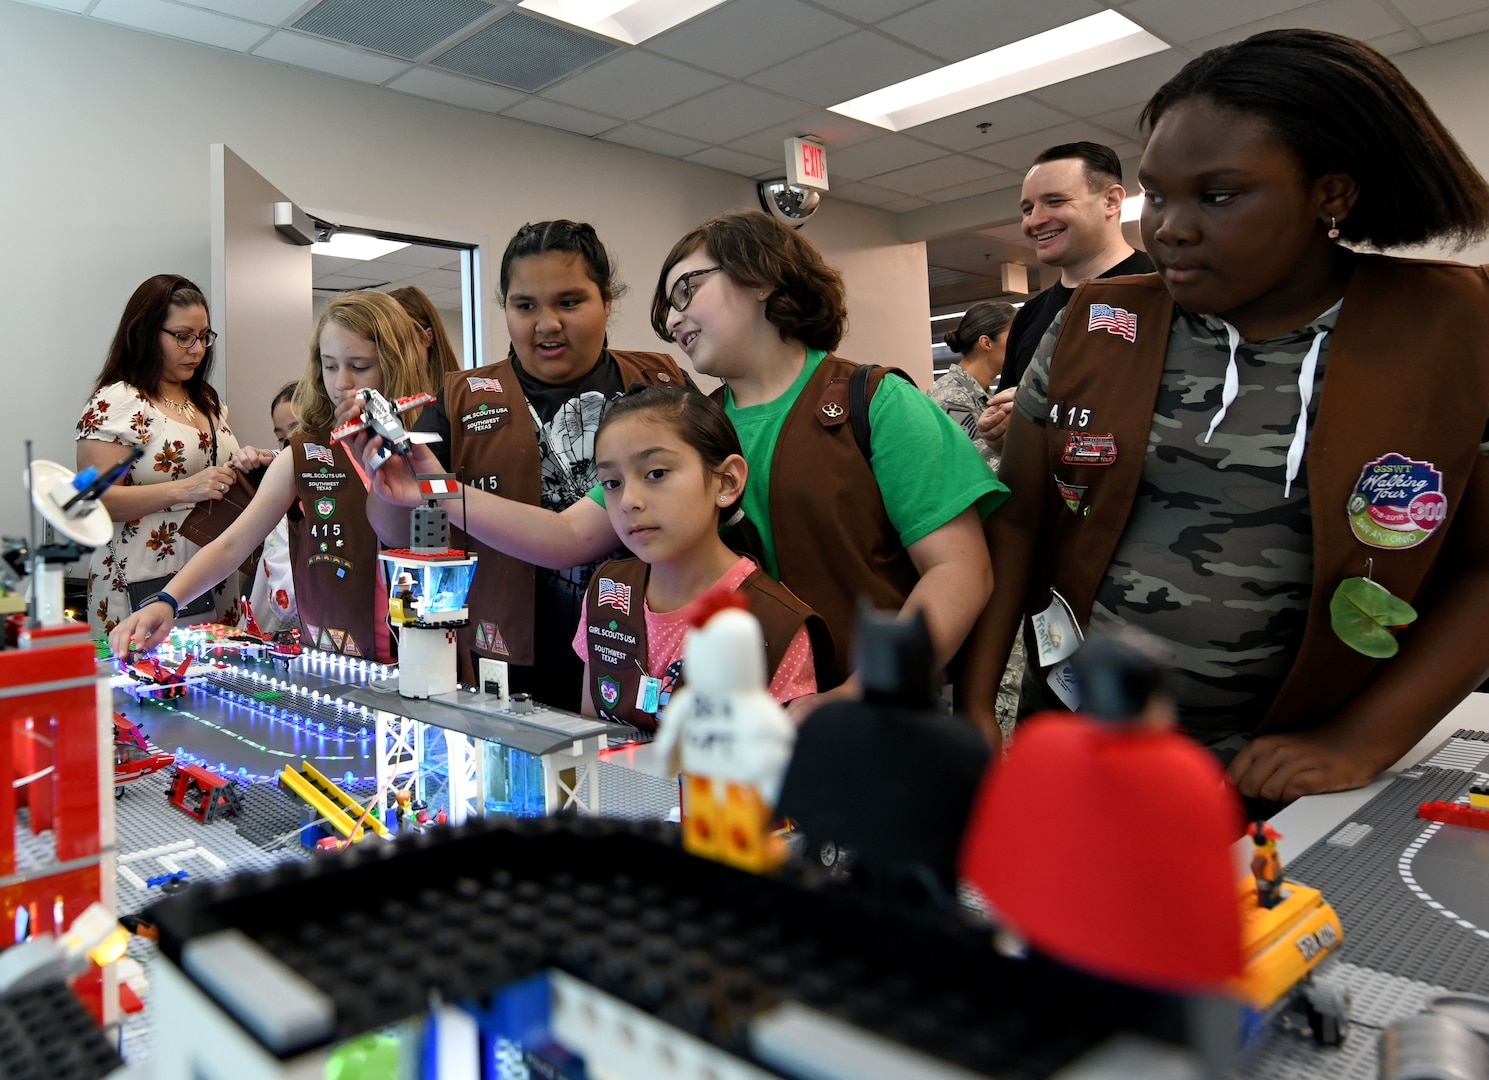 San Antonio-area Girl Scouts visit the 90th Cyberspace Operations Squadron “Bricks in the Loop” at Joint Base San Antonio-Lackland for a tour April 19. “Bricks in the Loop” mimics an Air Force installation with items such as a fire station, police station, airport, jets and tanker trucks, all used to simulate real-world cyber systems in training cyber operators.